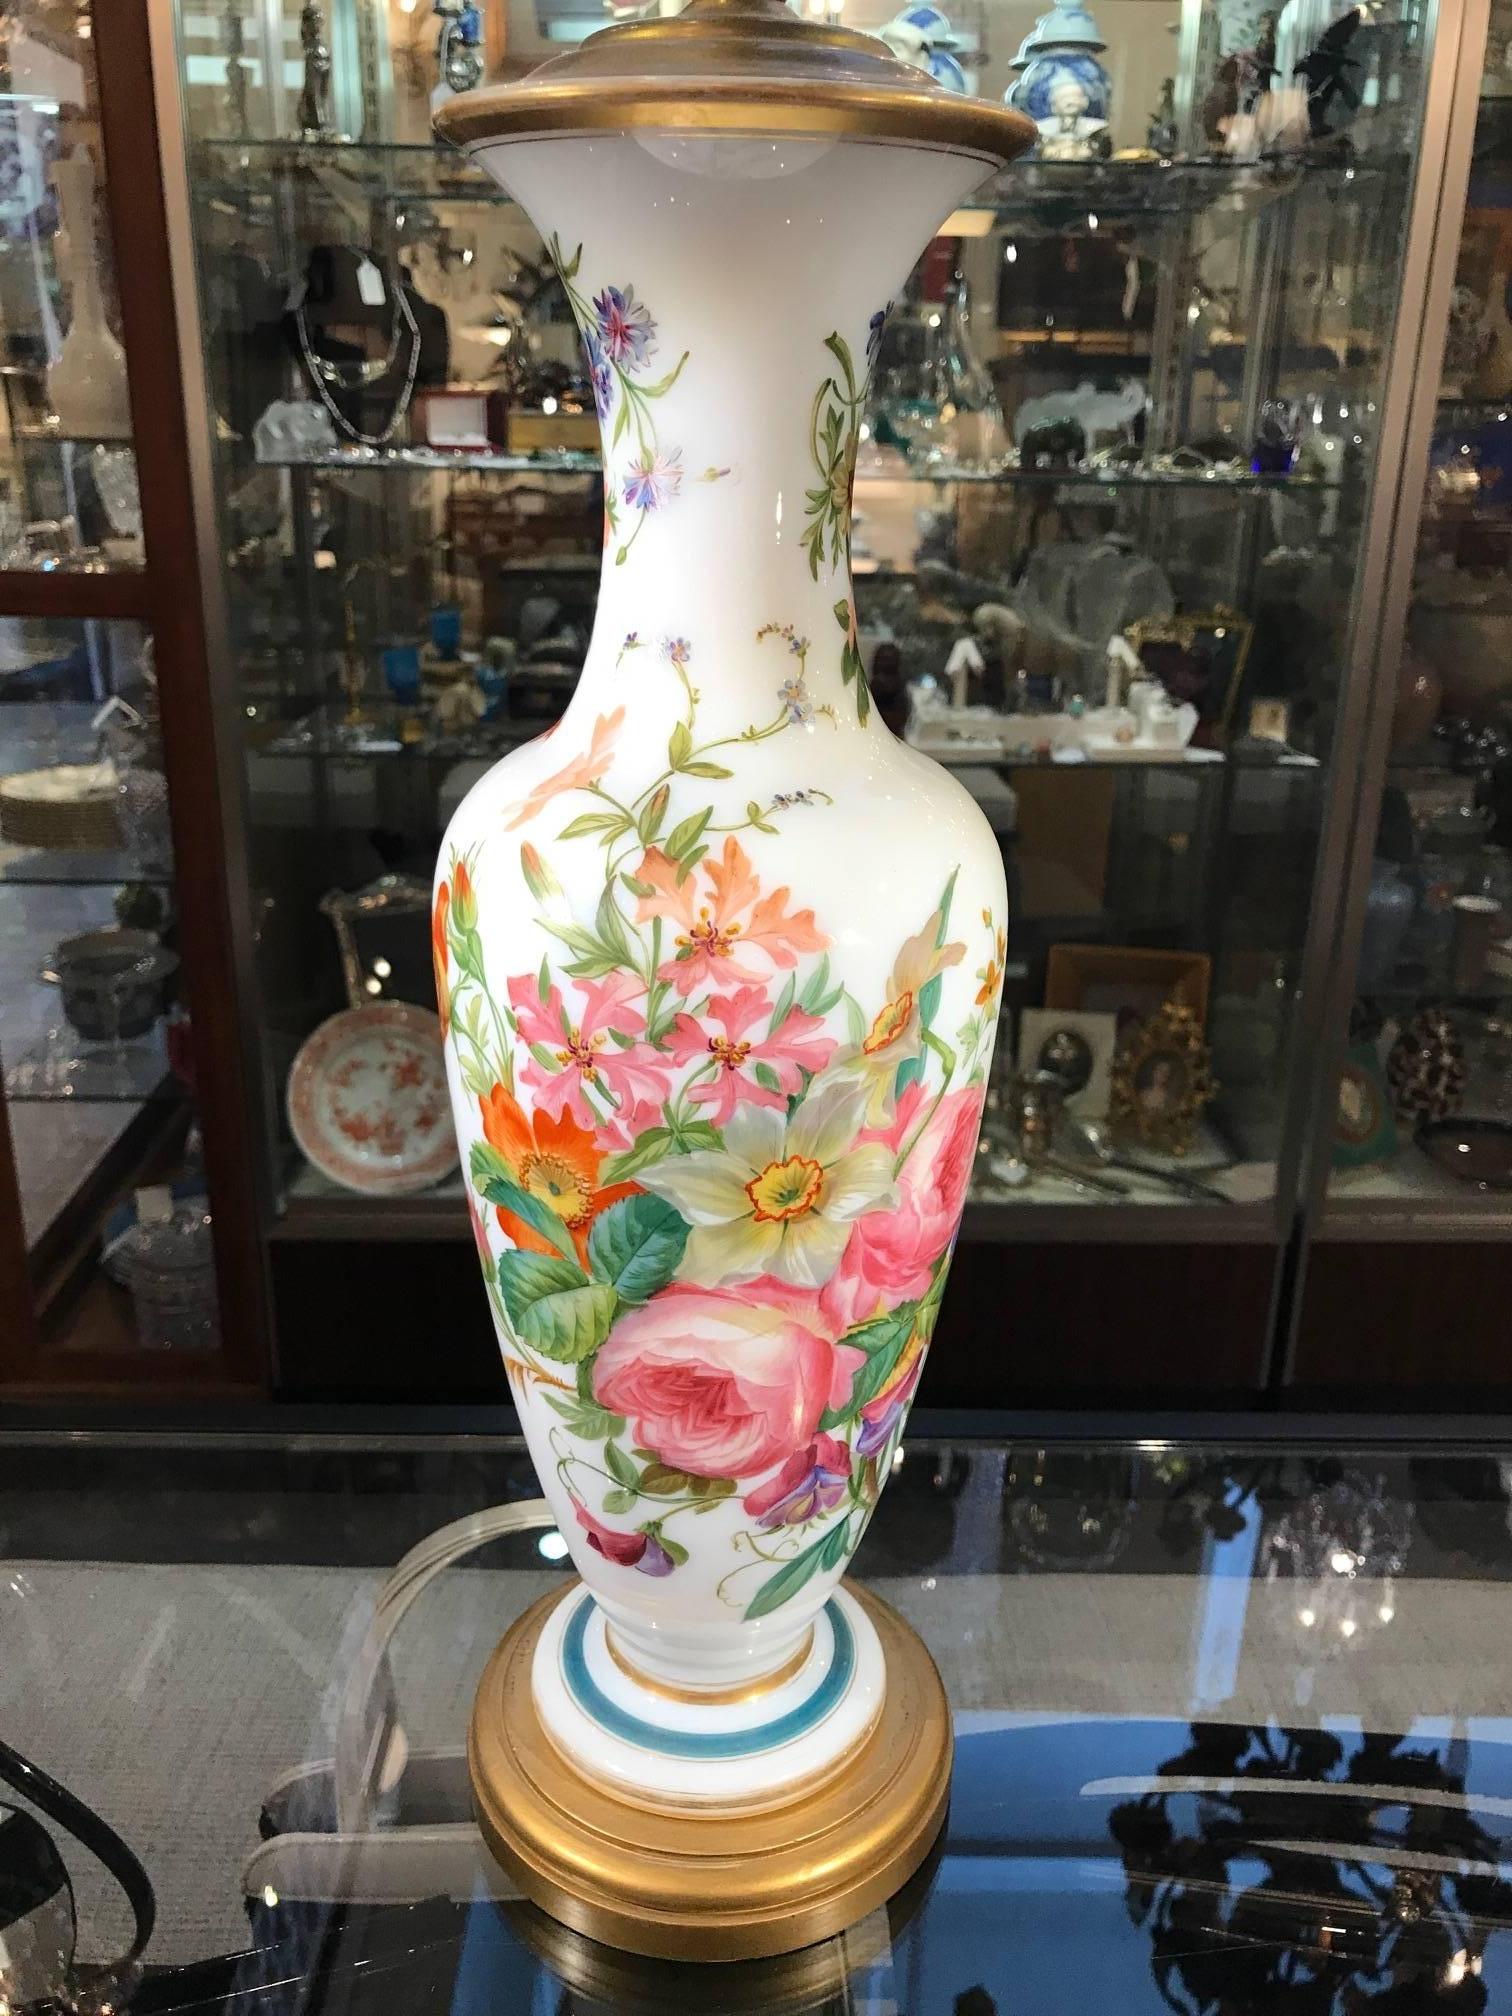 An opulent Baccarat opaline glass vase now electrified with floral paintings and gold painted border frieze attributed to being decorated in the workshop of Jean-Francois Robert, circa 1840. Roses, poppies and chrysanthemums are among the luxurious